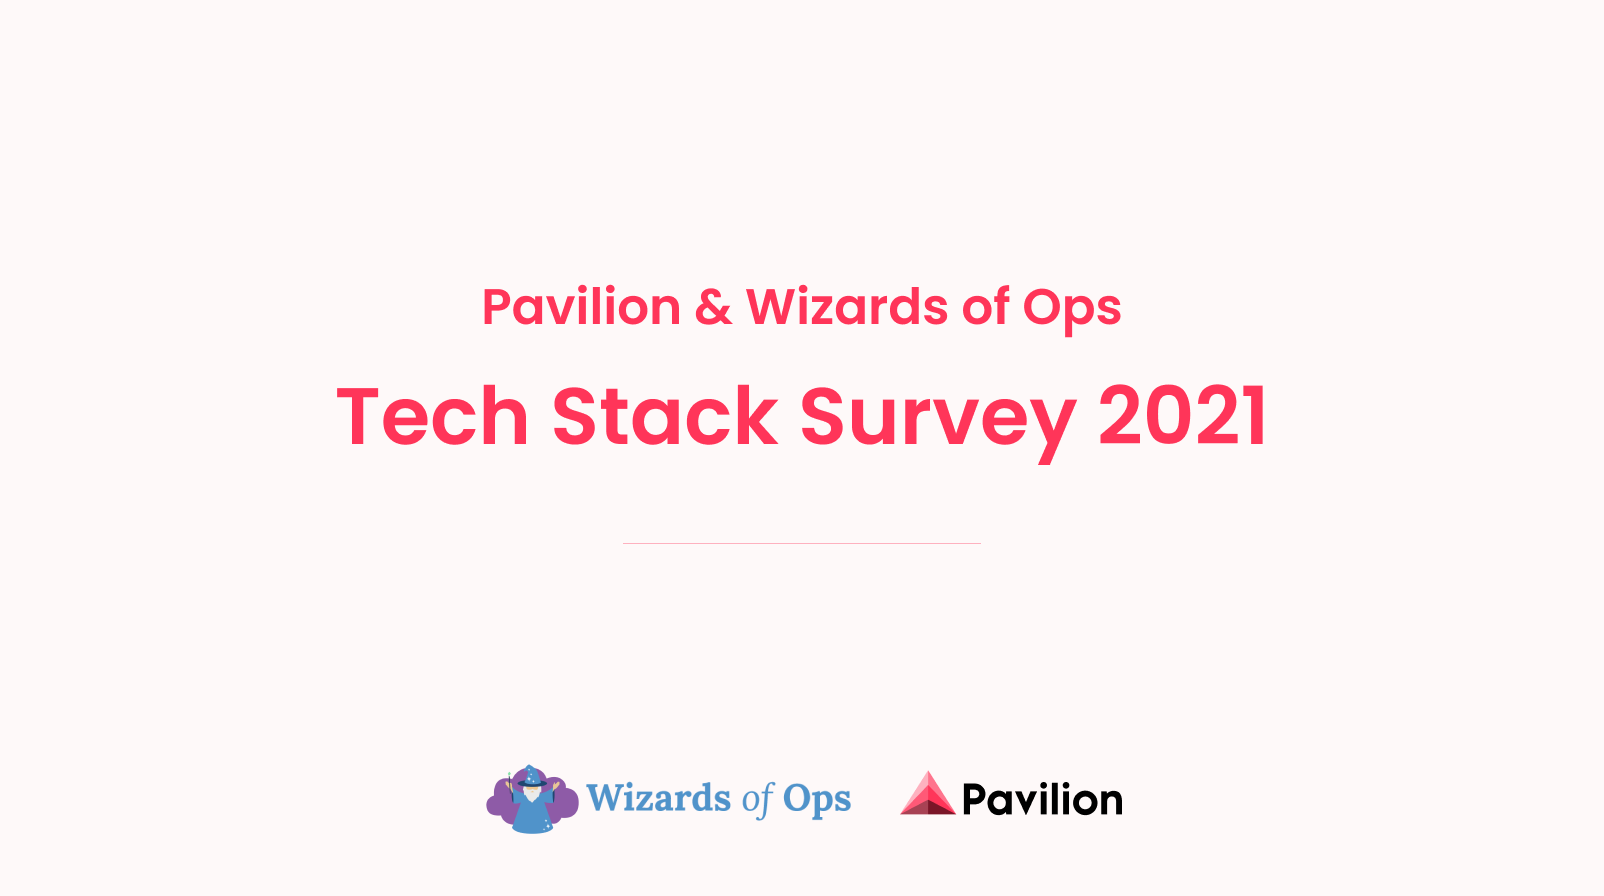 Wizards of Ops Tech Stack Survey 2021 Results